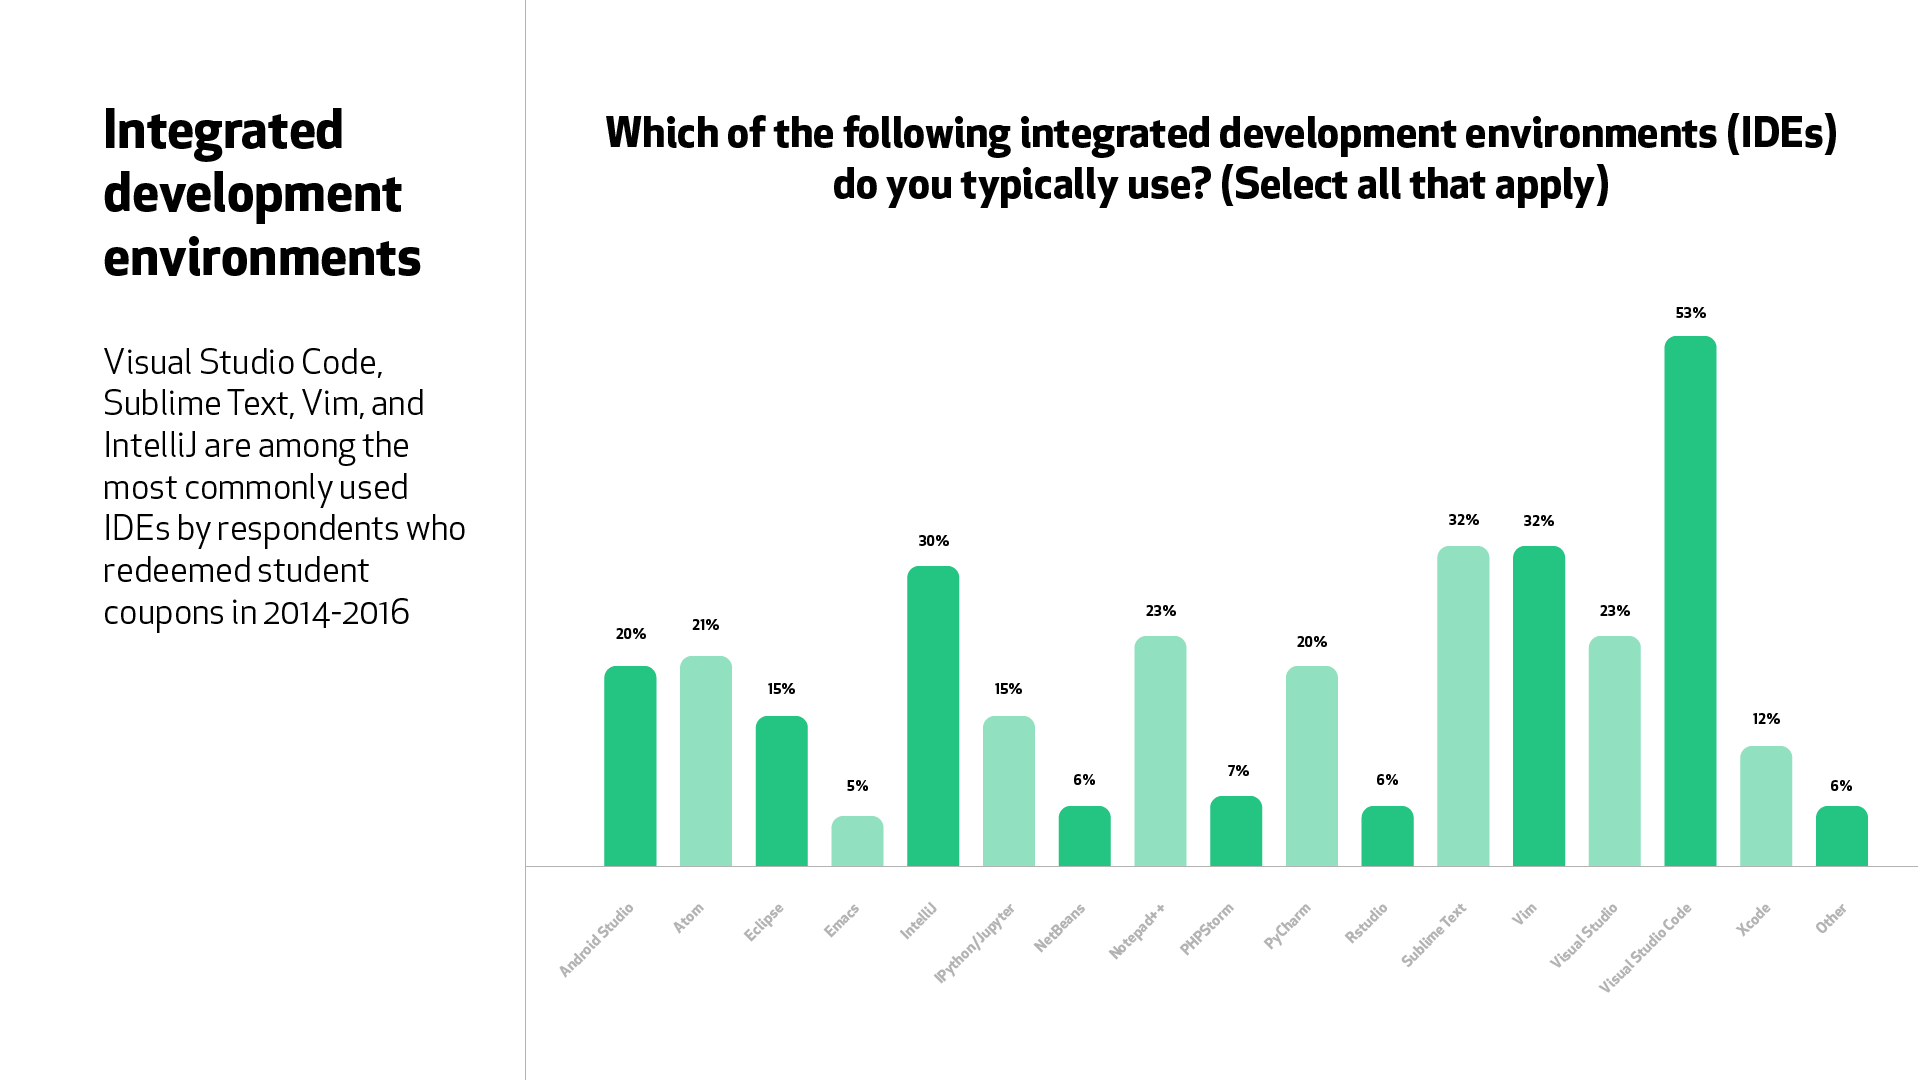 A graph for the question, “Which of the following integrated development environments (IDEs) do you typically use?” Visual Studio Code (53%), Sublime Text (32%), and IntelliJ (30%) were the most common student responses.